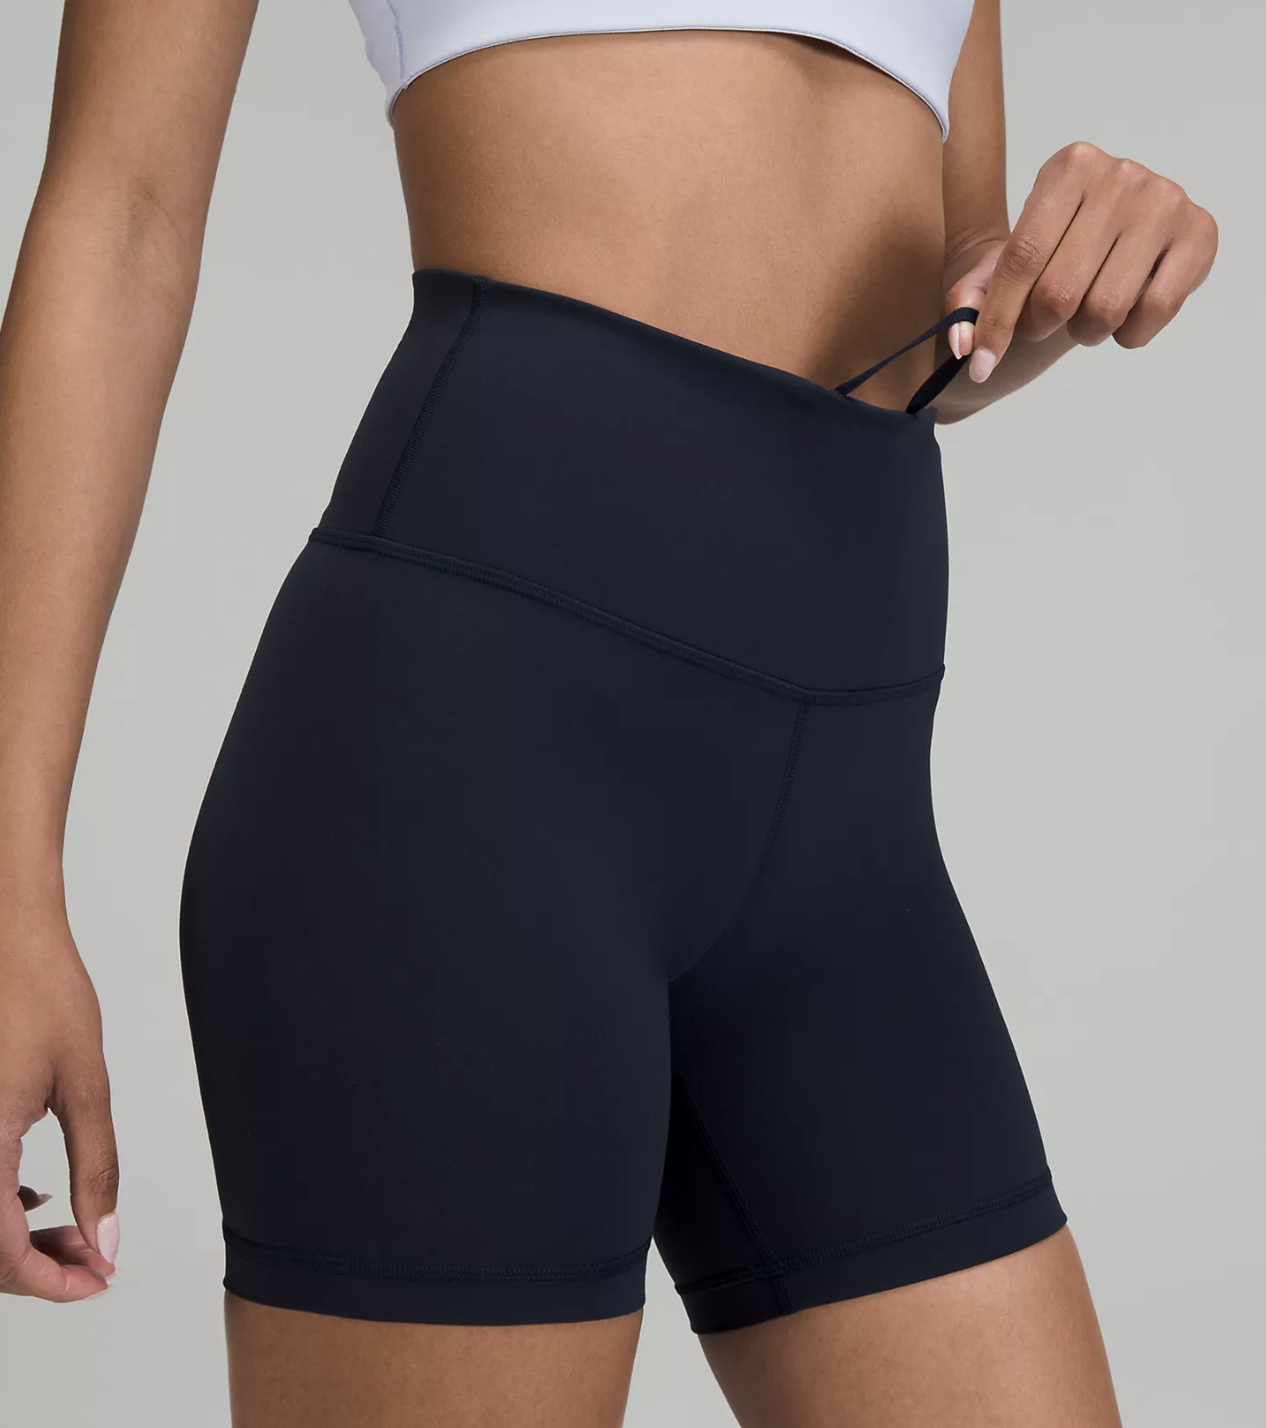 A person wearing the shorts and tugging on their waistband string